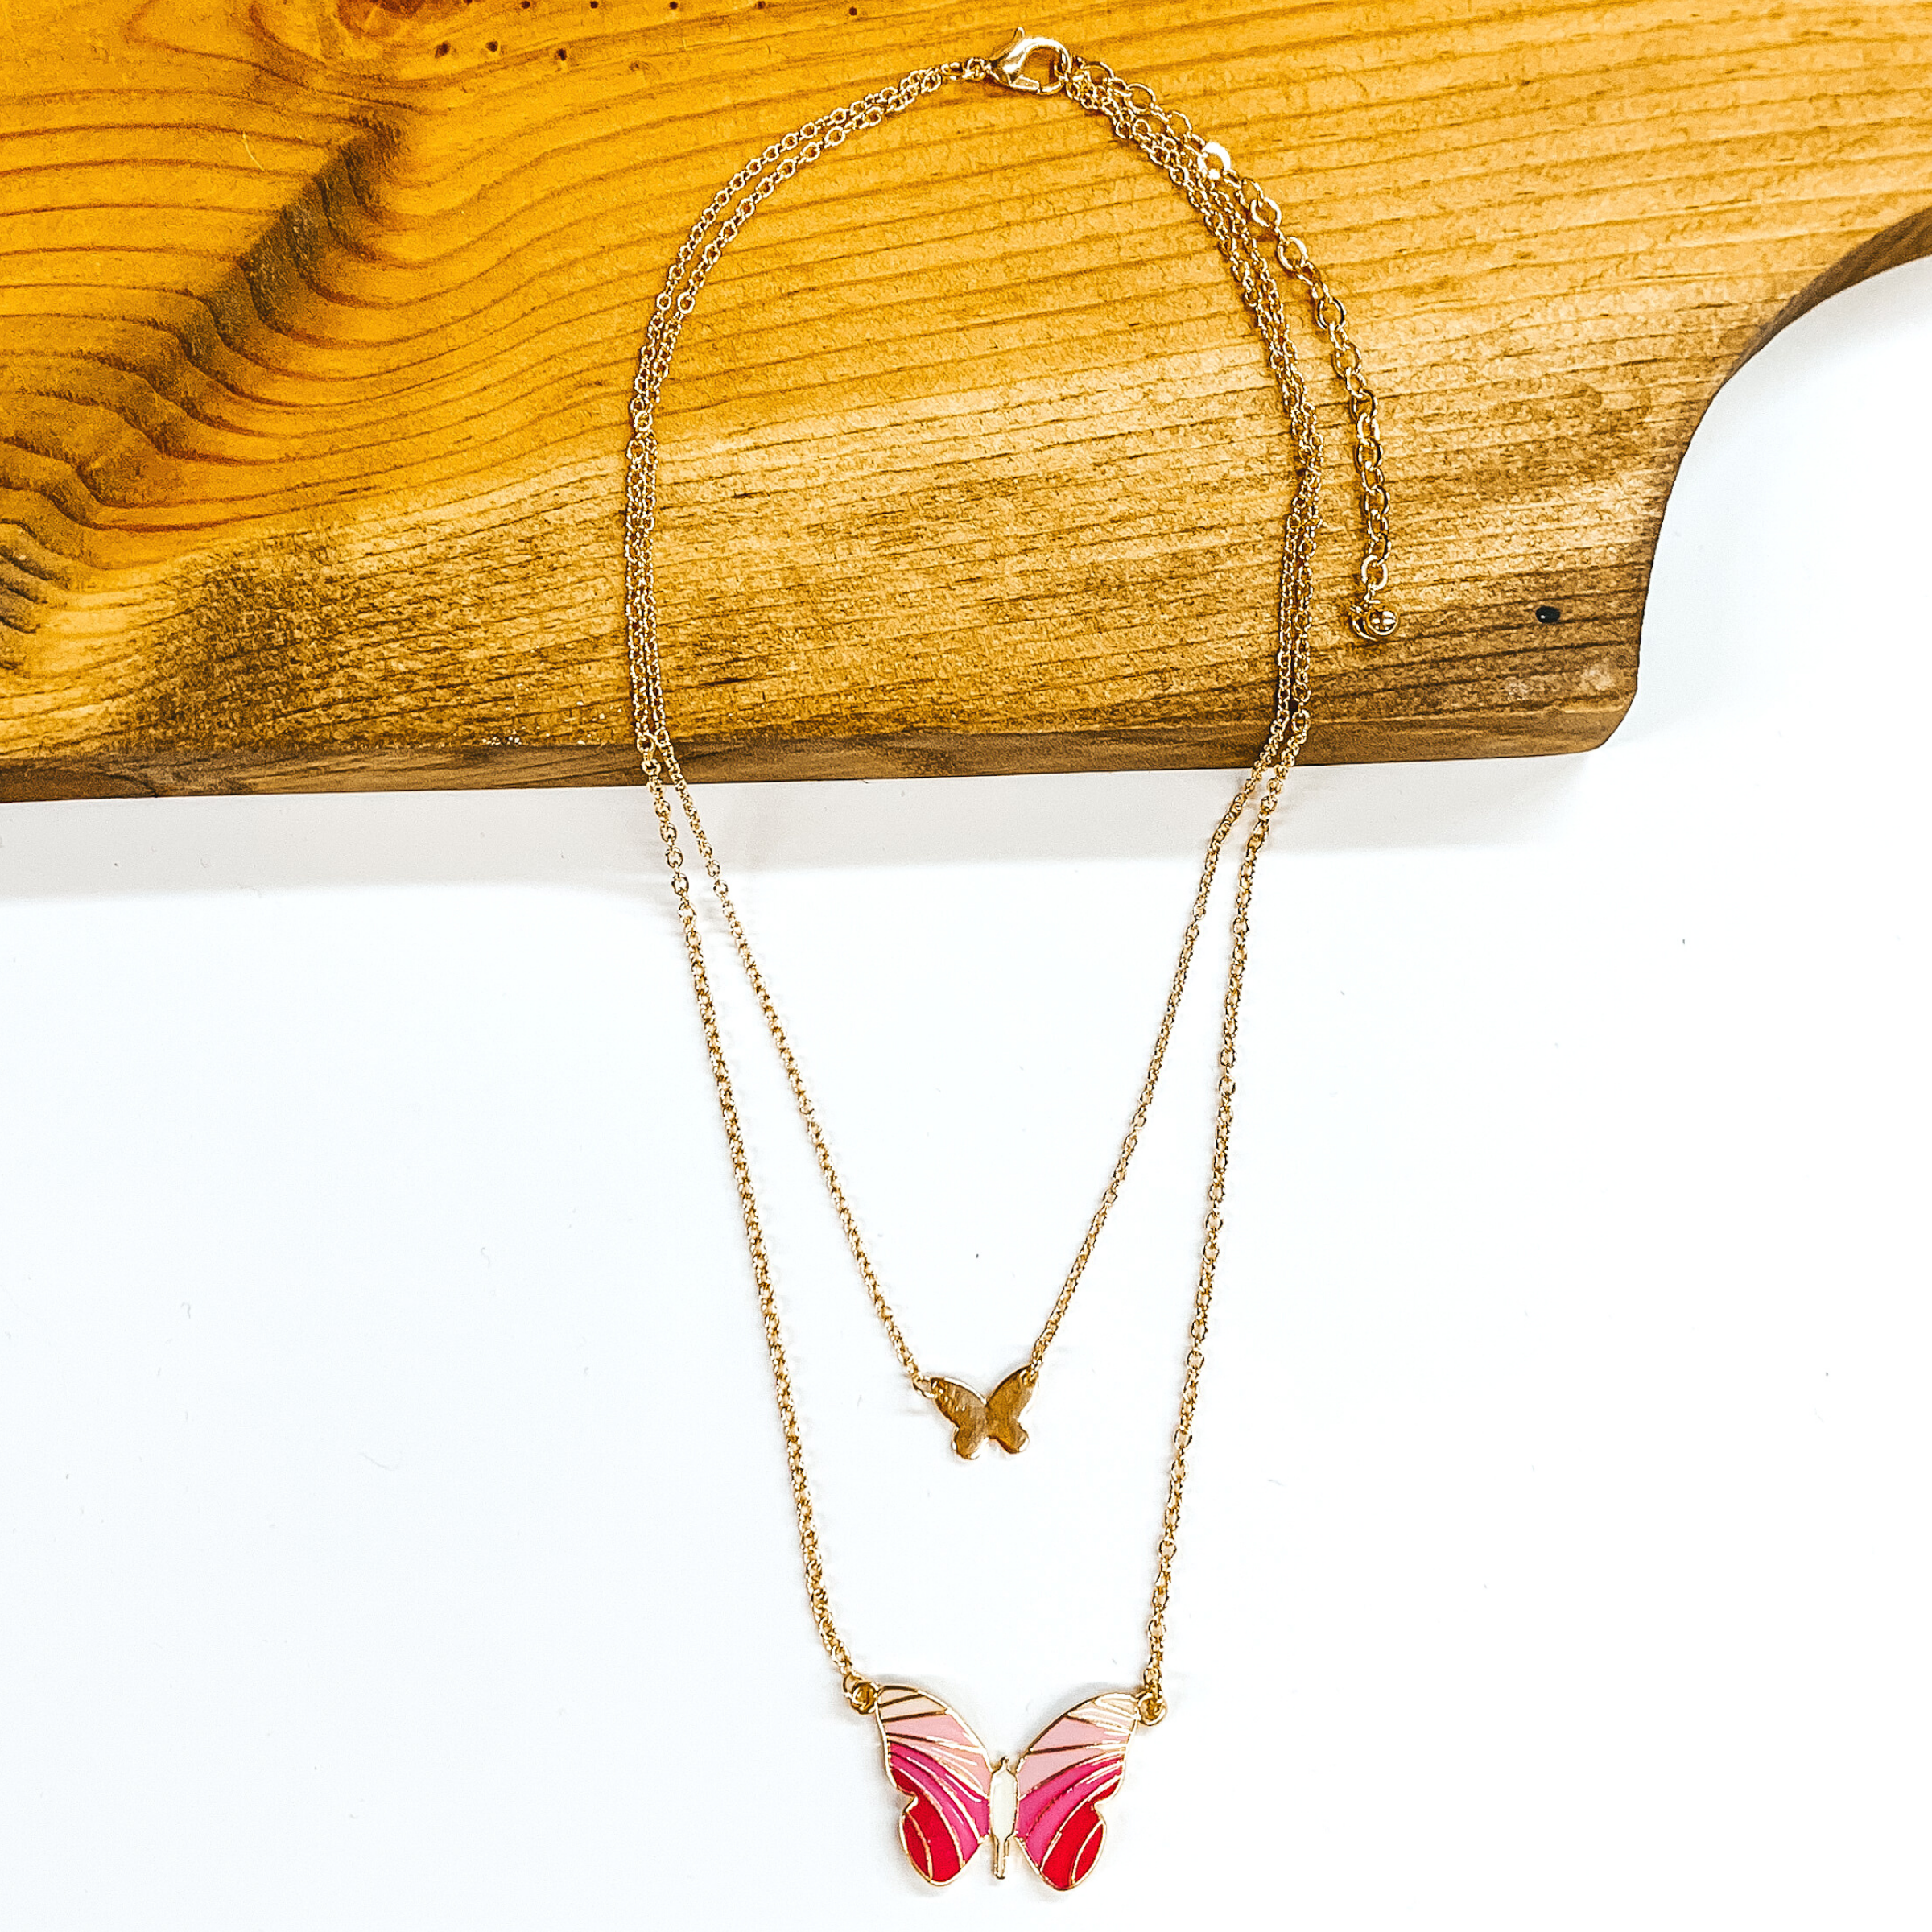 Double Gold Chain Necklace with a Butterfly Pendant in Pink - Giddy Up Glamour Boutique